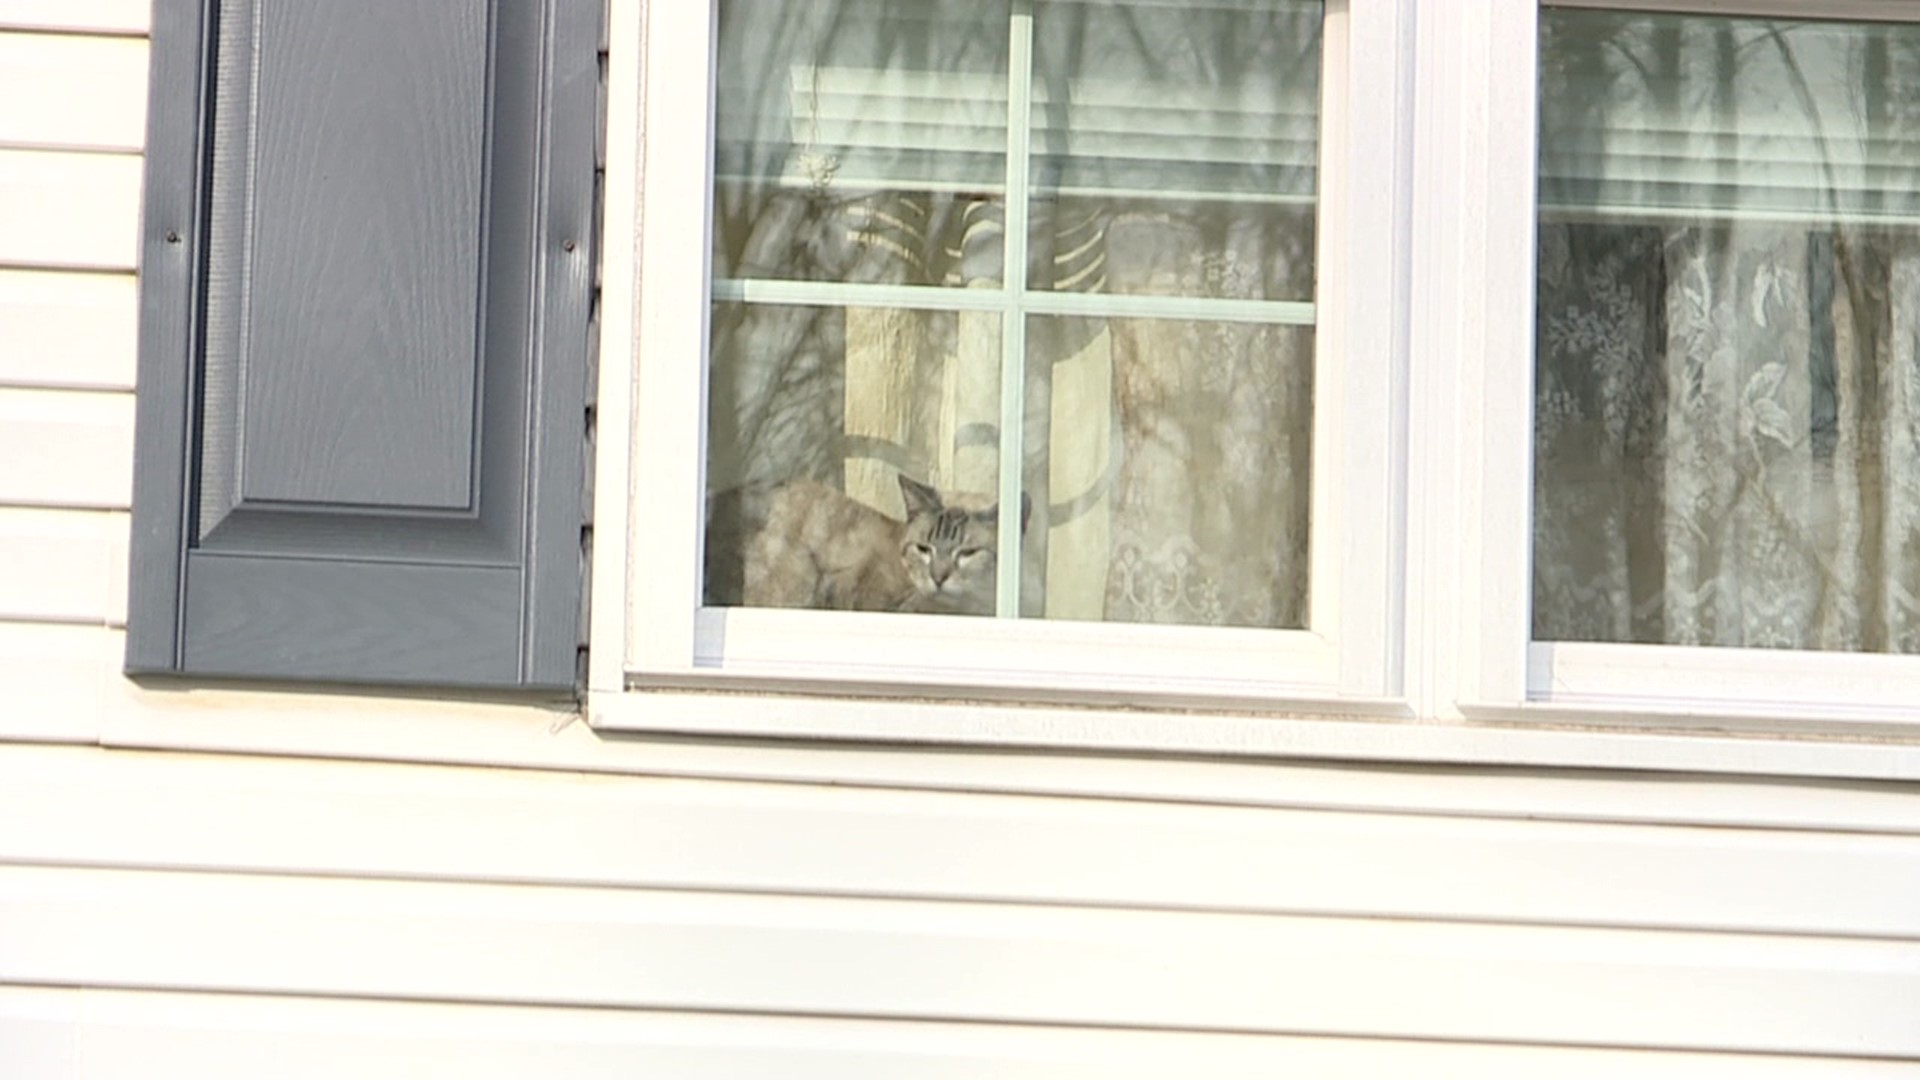 Officials with the Hillside SPCA removed the cats from a home near Pottsville.